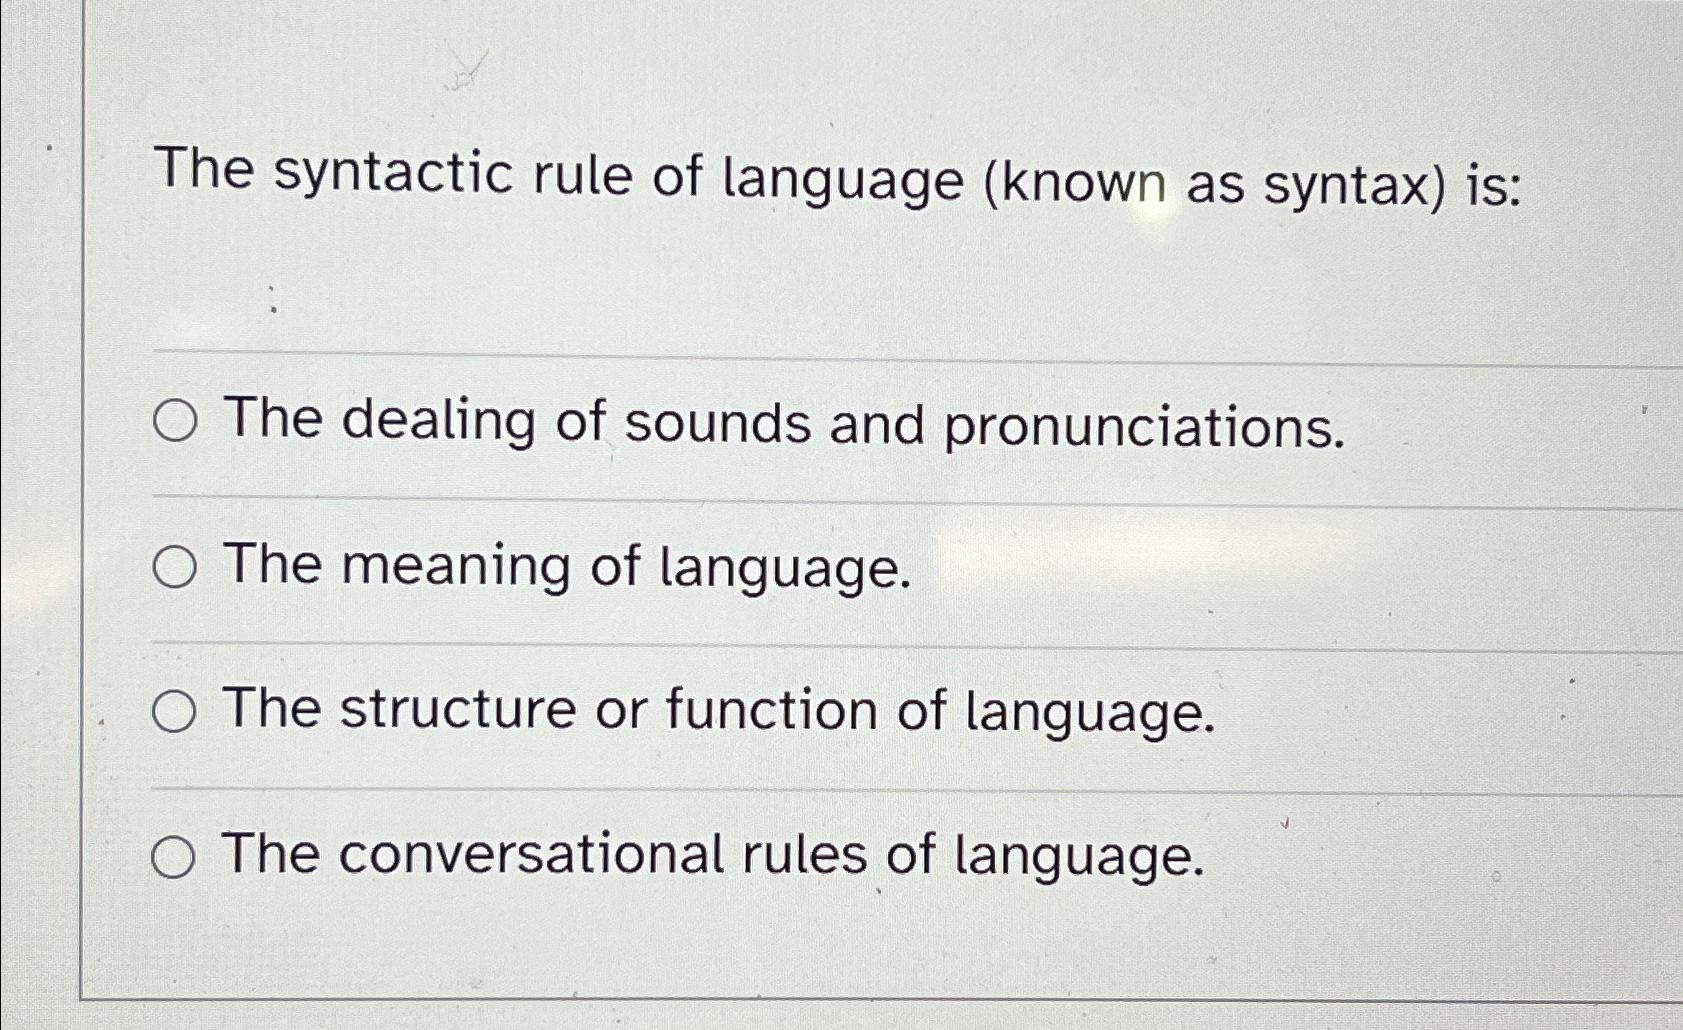 The syntactic rule of language (known as syntax) is: The dealing of sounds and pronunciations. The meaning of